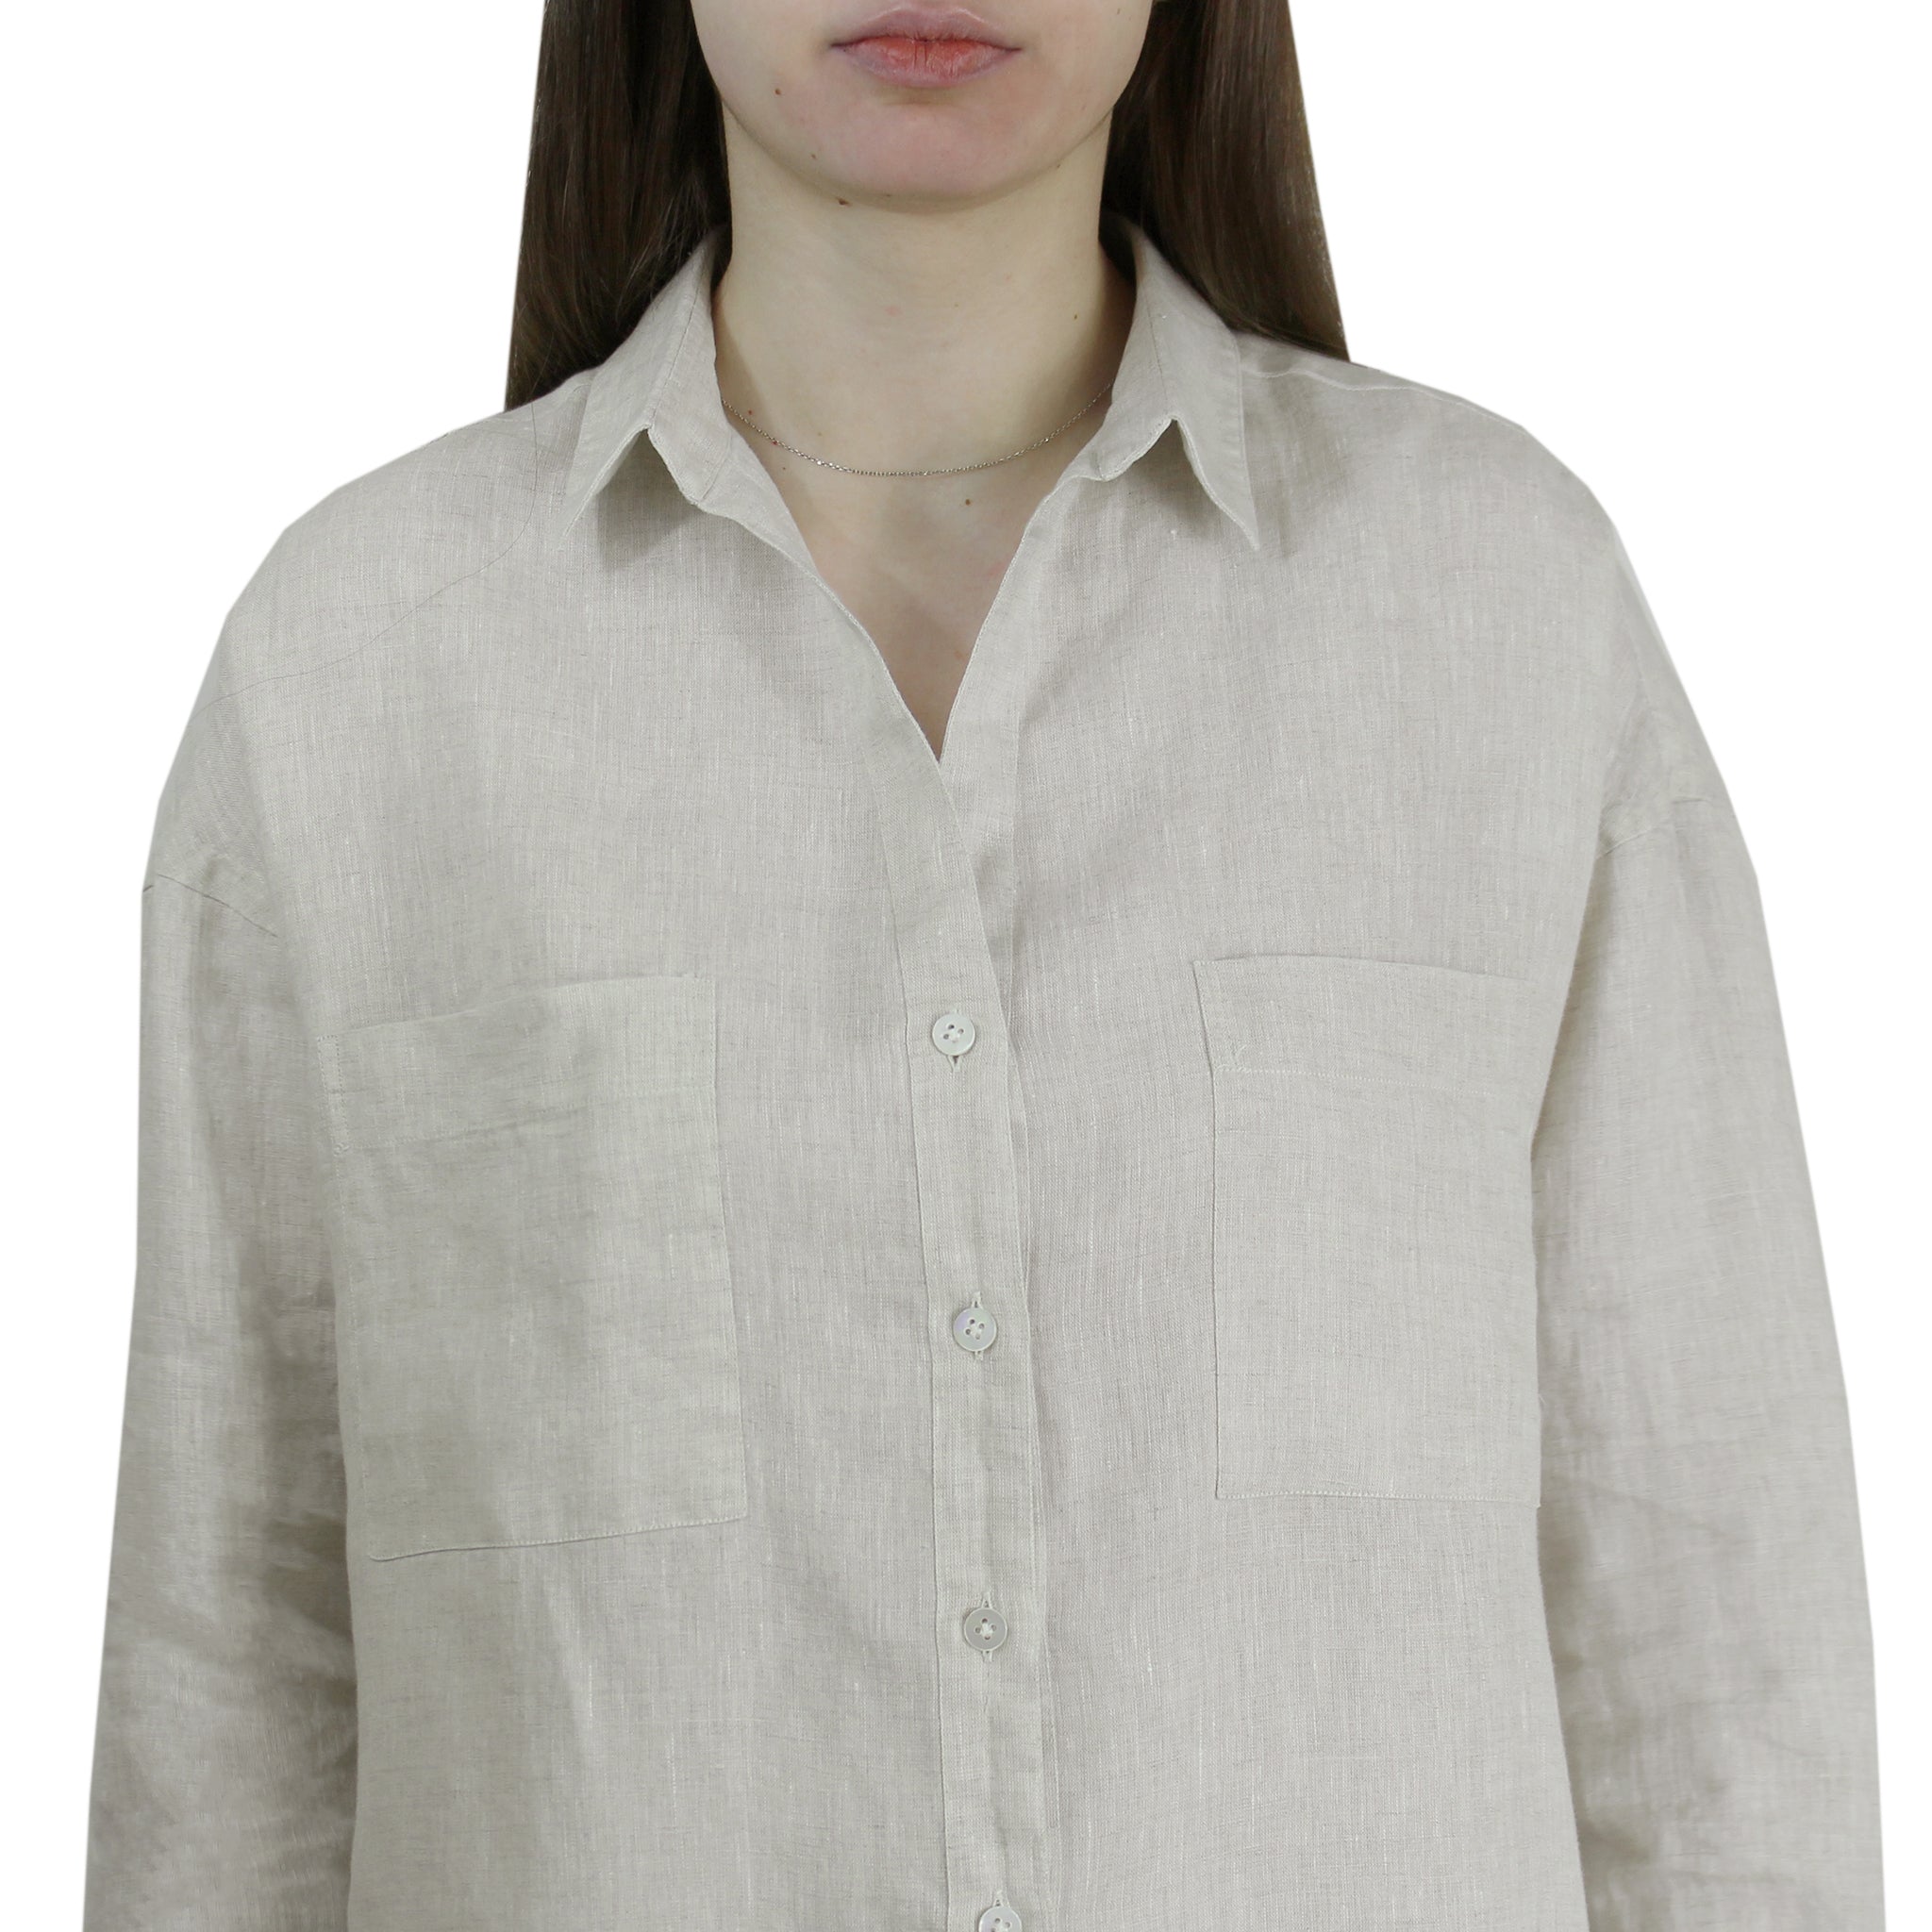 Sand linen shirt with pockets and webbing to adjust the sleeve